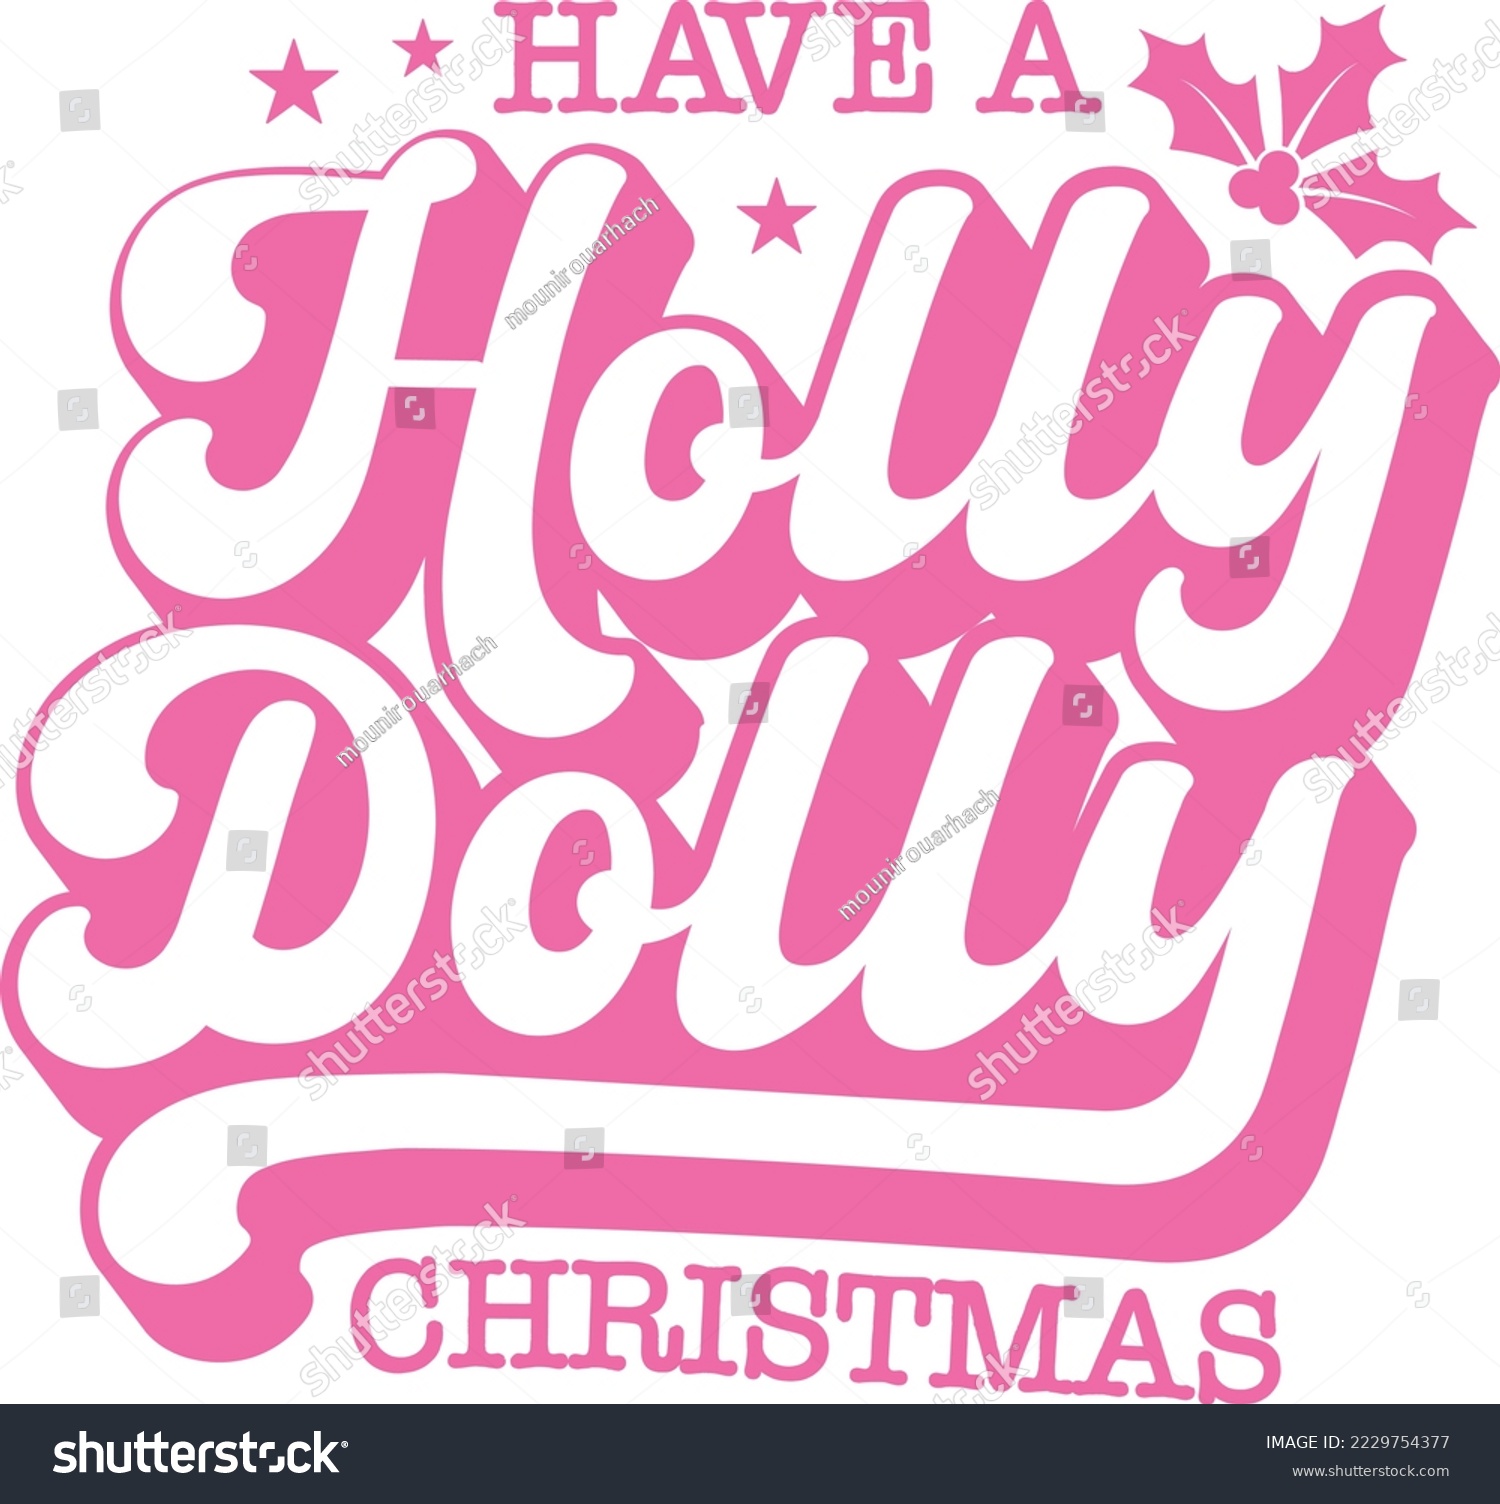 SVG of have a holly dolly christmas,western christmas,Pink design 05 svg